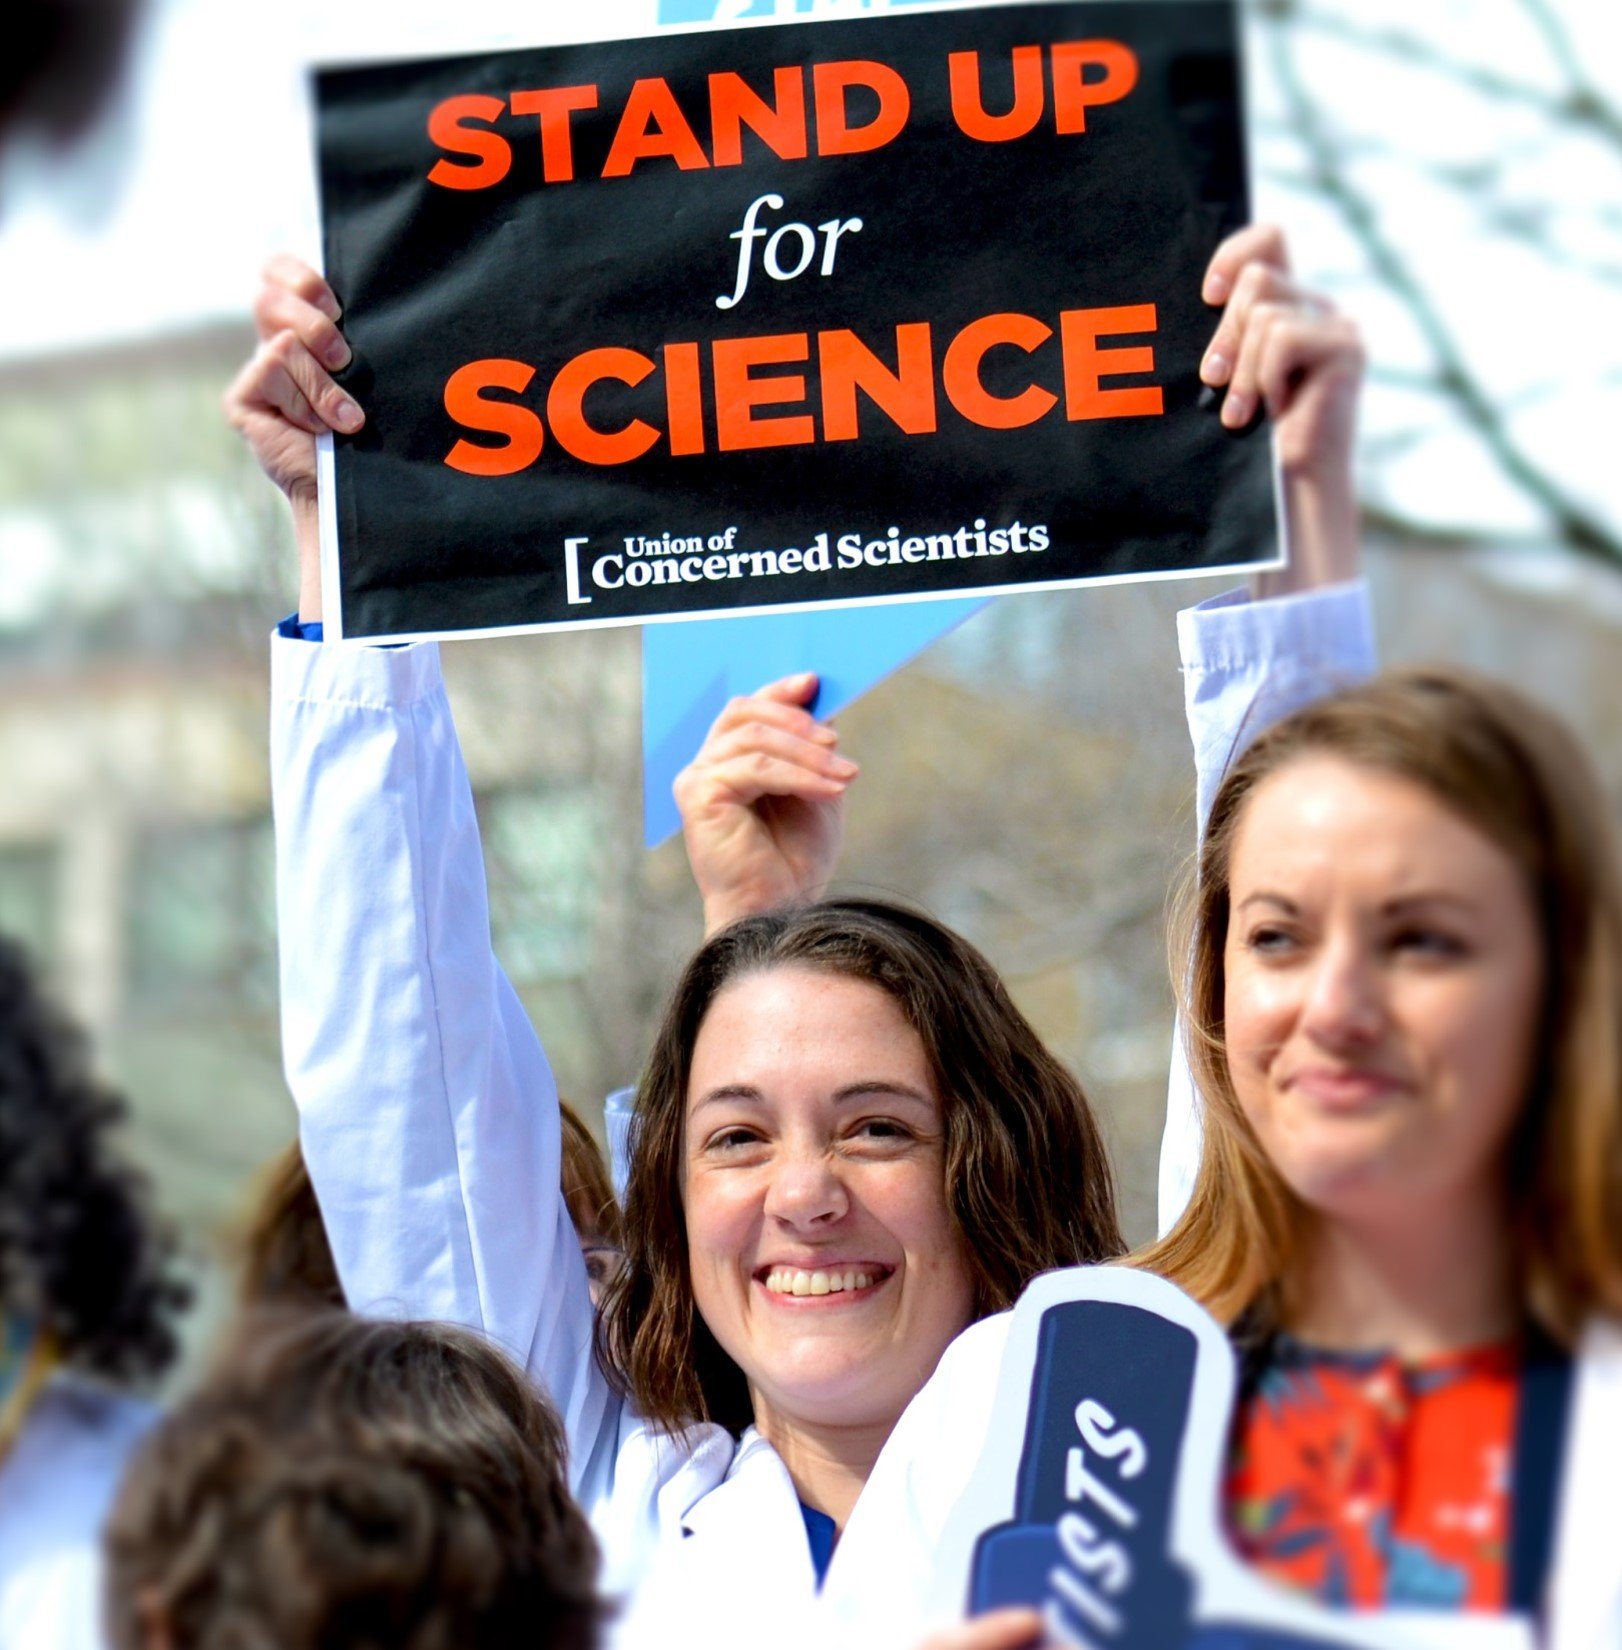  Gretchen holding a Stand Up For Science sign. Photo by: Union of Concerned Scientists/Anthony Eyring 